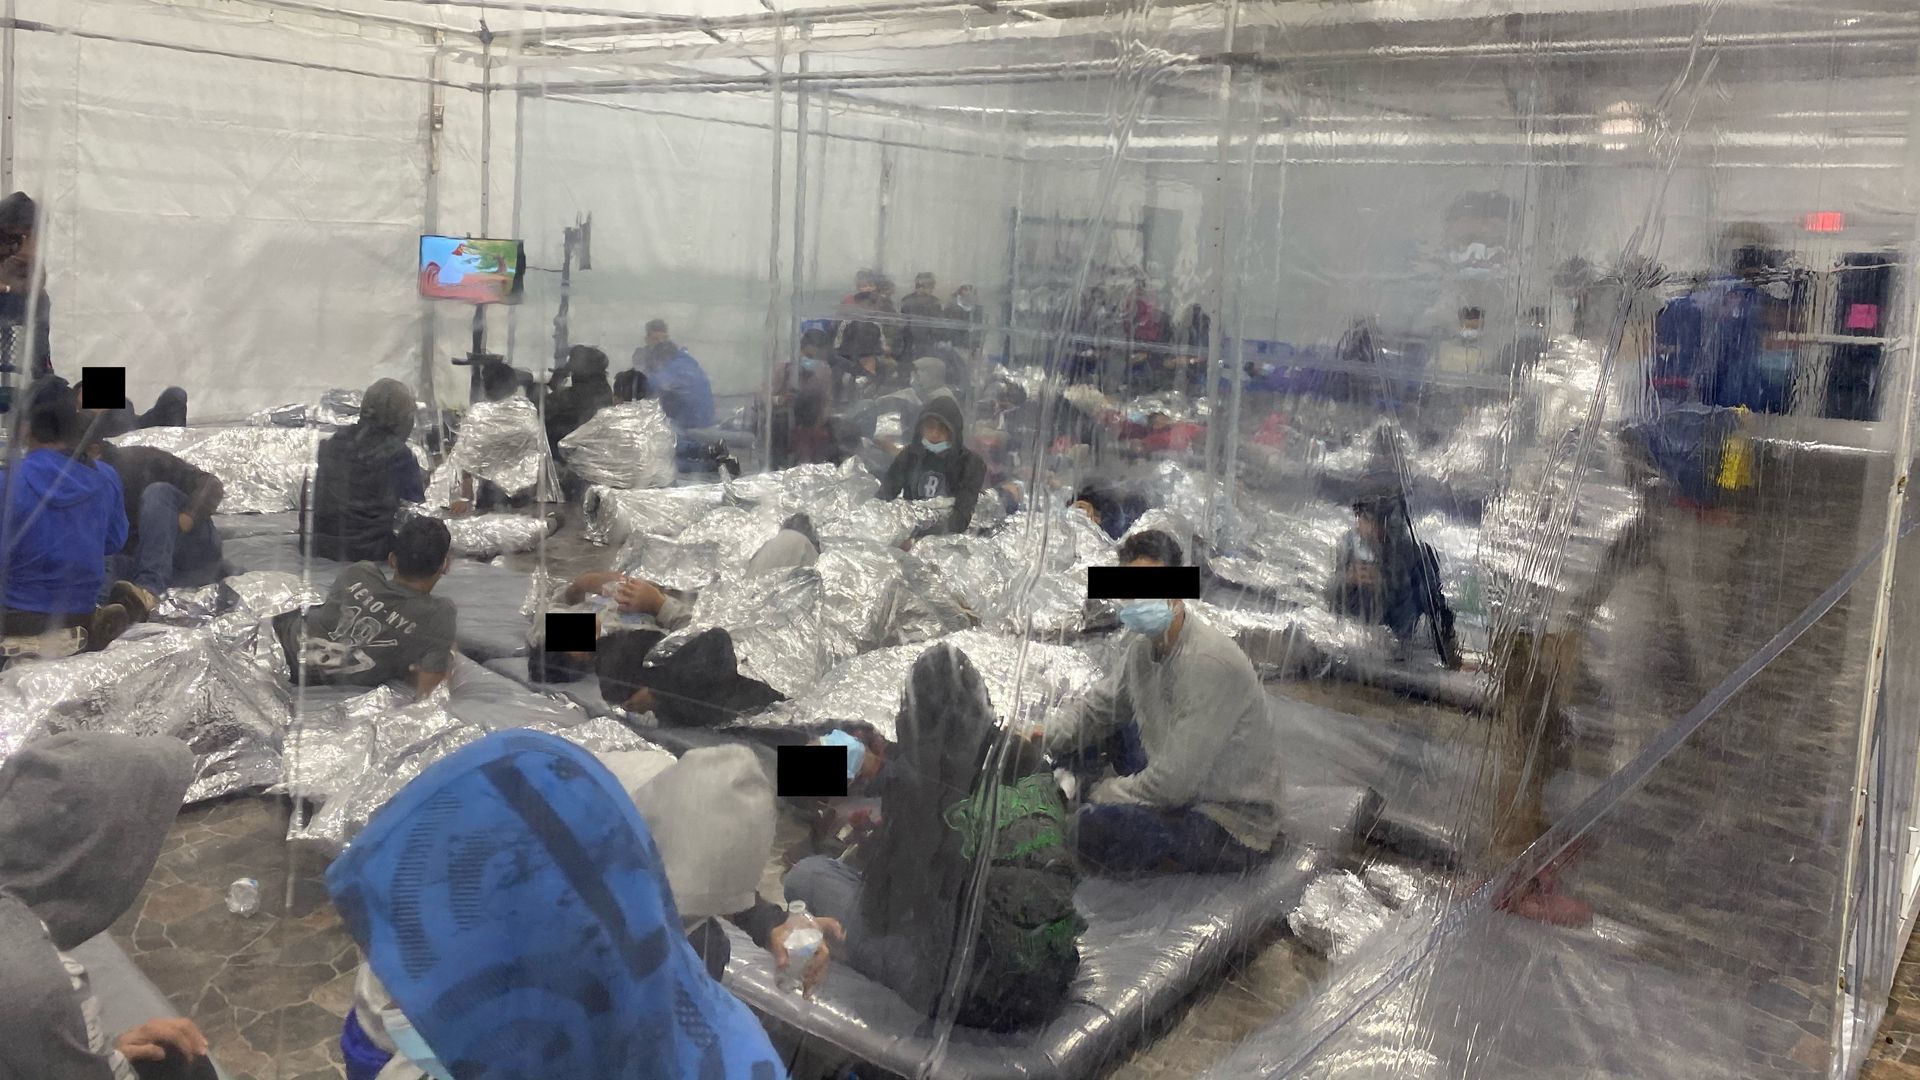 Migrants sit in a plastic contained area inside a tent, wrapped in aluminum blankets to keep warm